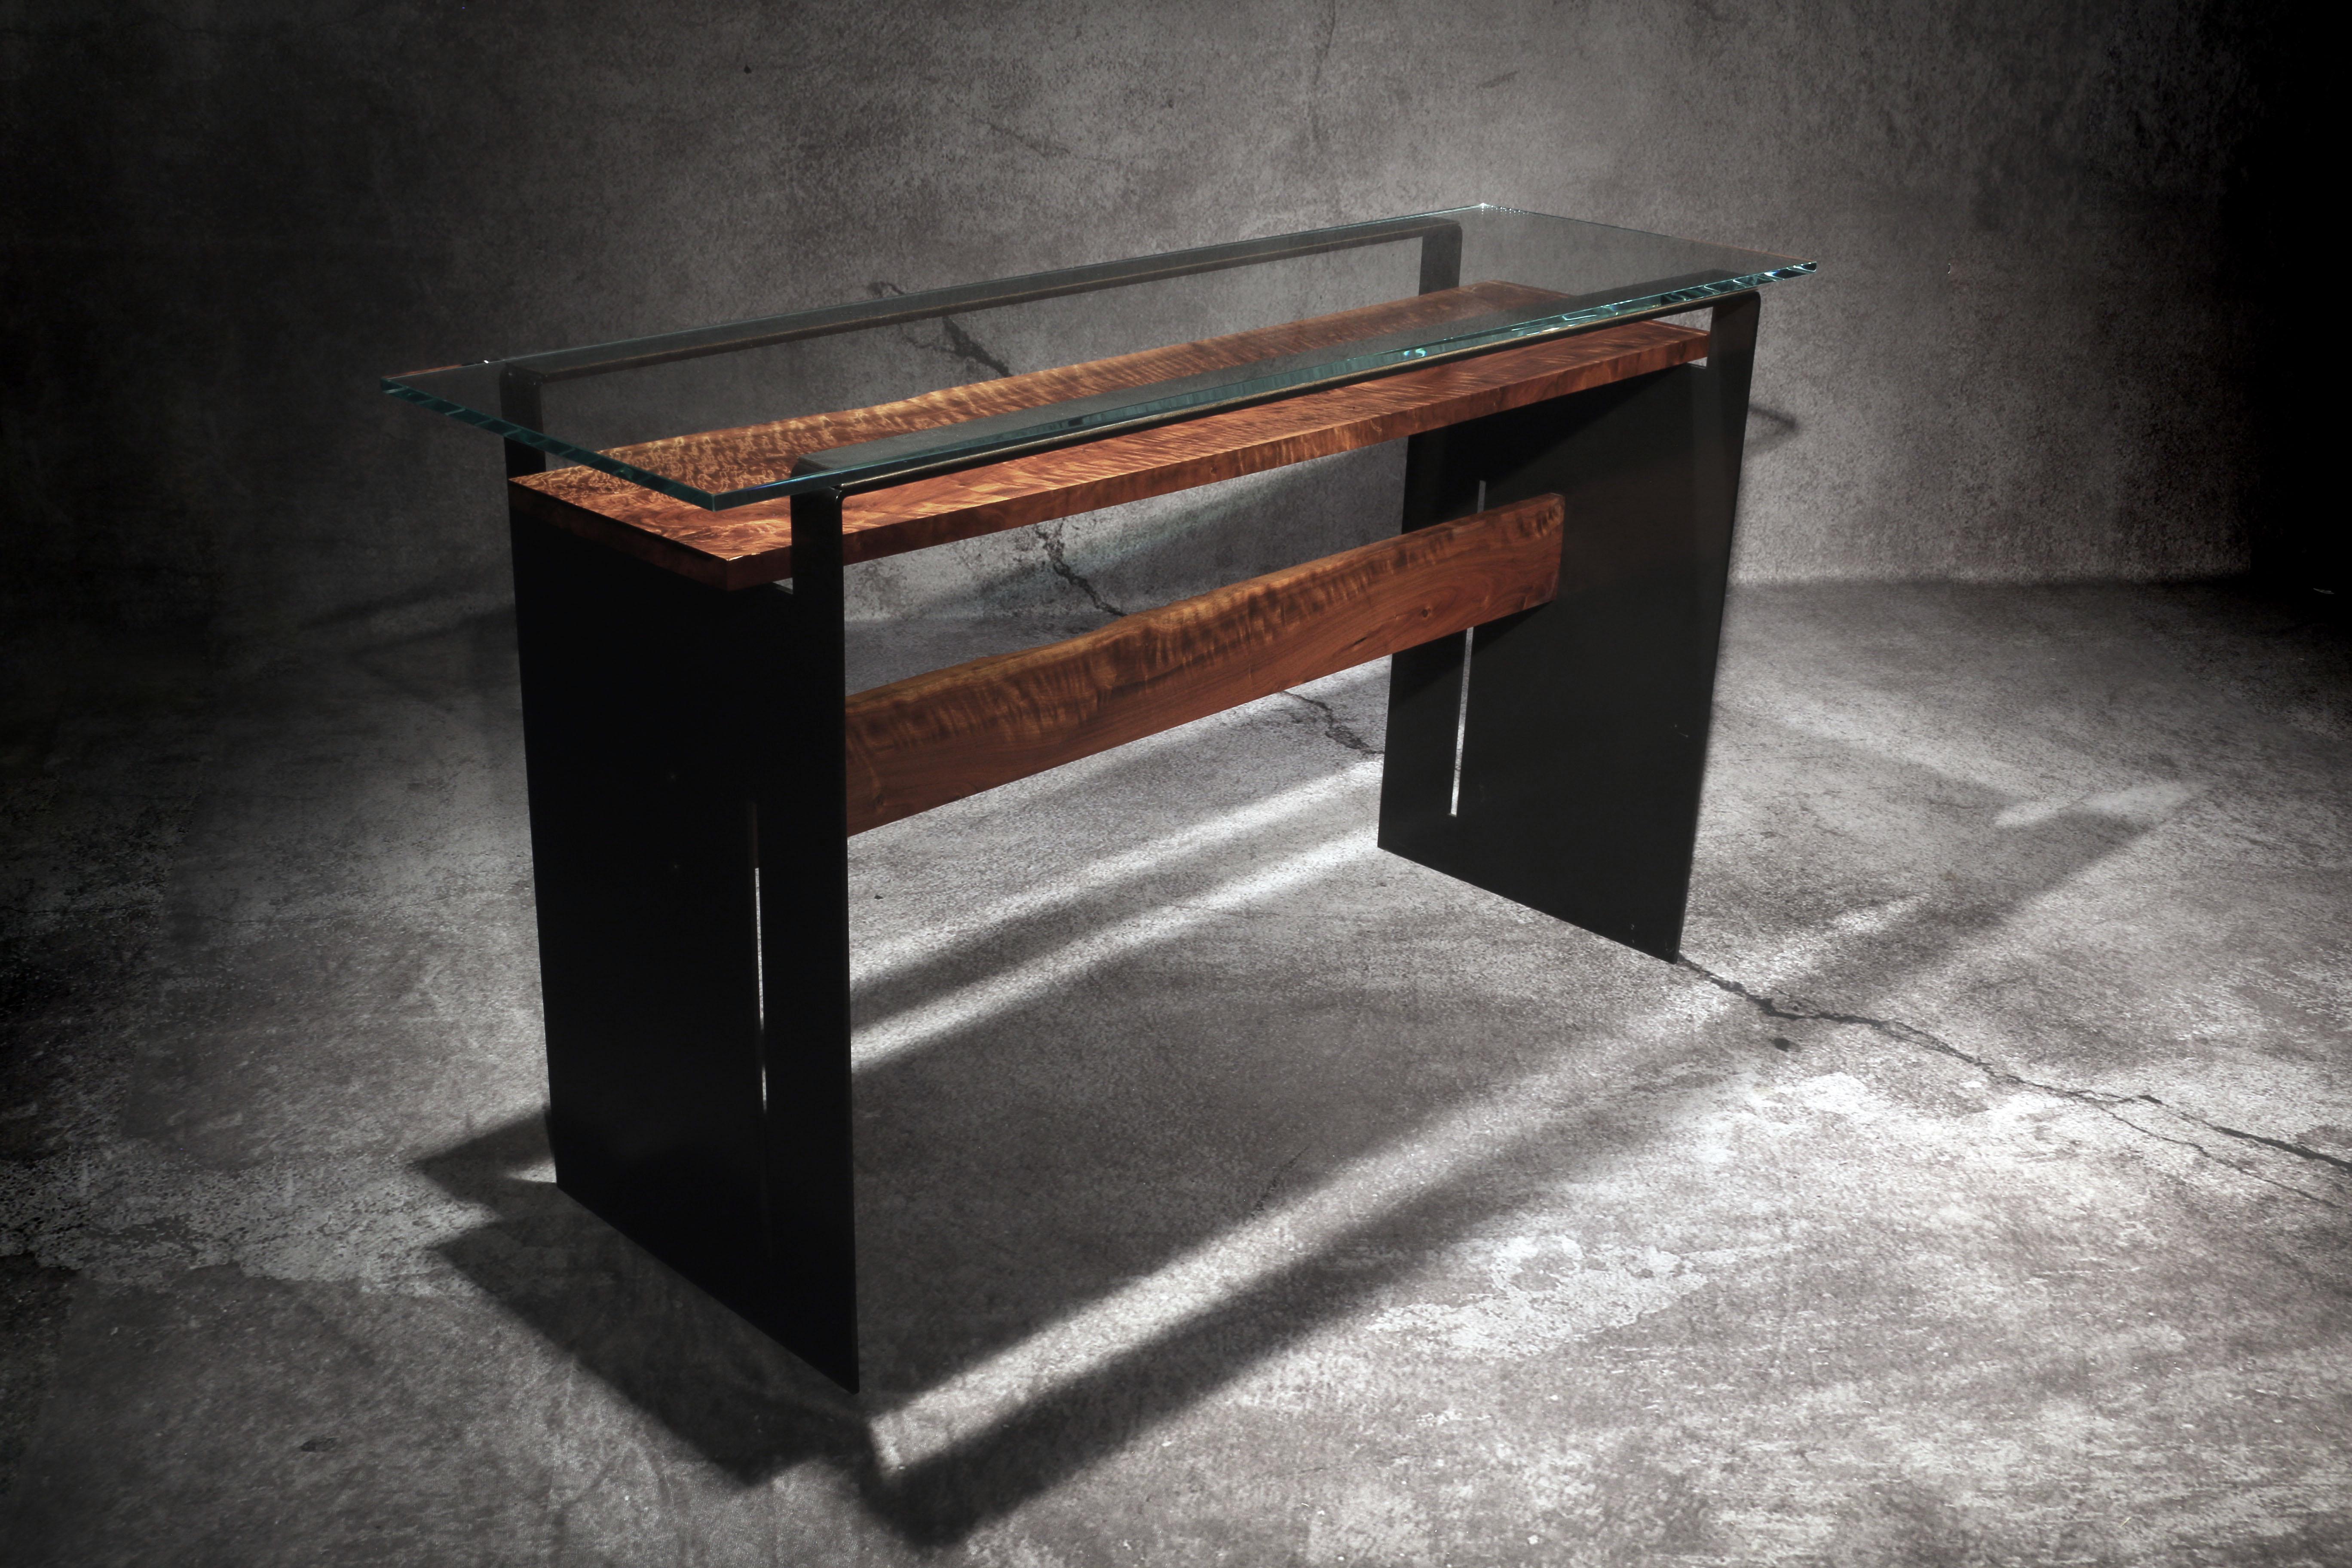 Tiger table is conceived, designed and created by award-winning artist and architectural designer Michael Olshefski of Primal Modern. It is inspired by both complexity and simplicity in nature, and Japanese origami. This modern console table